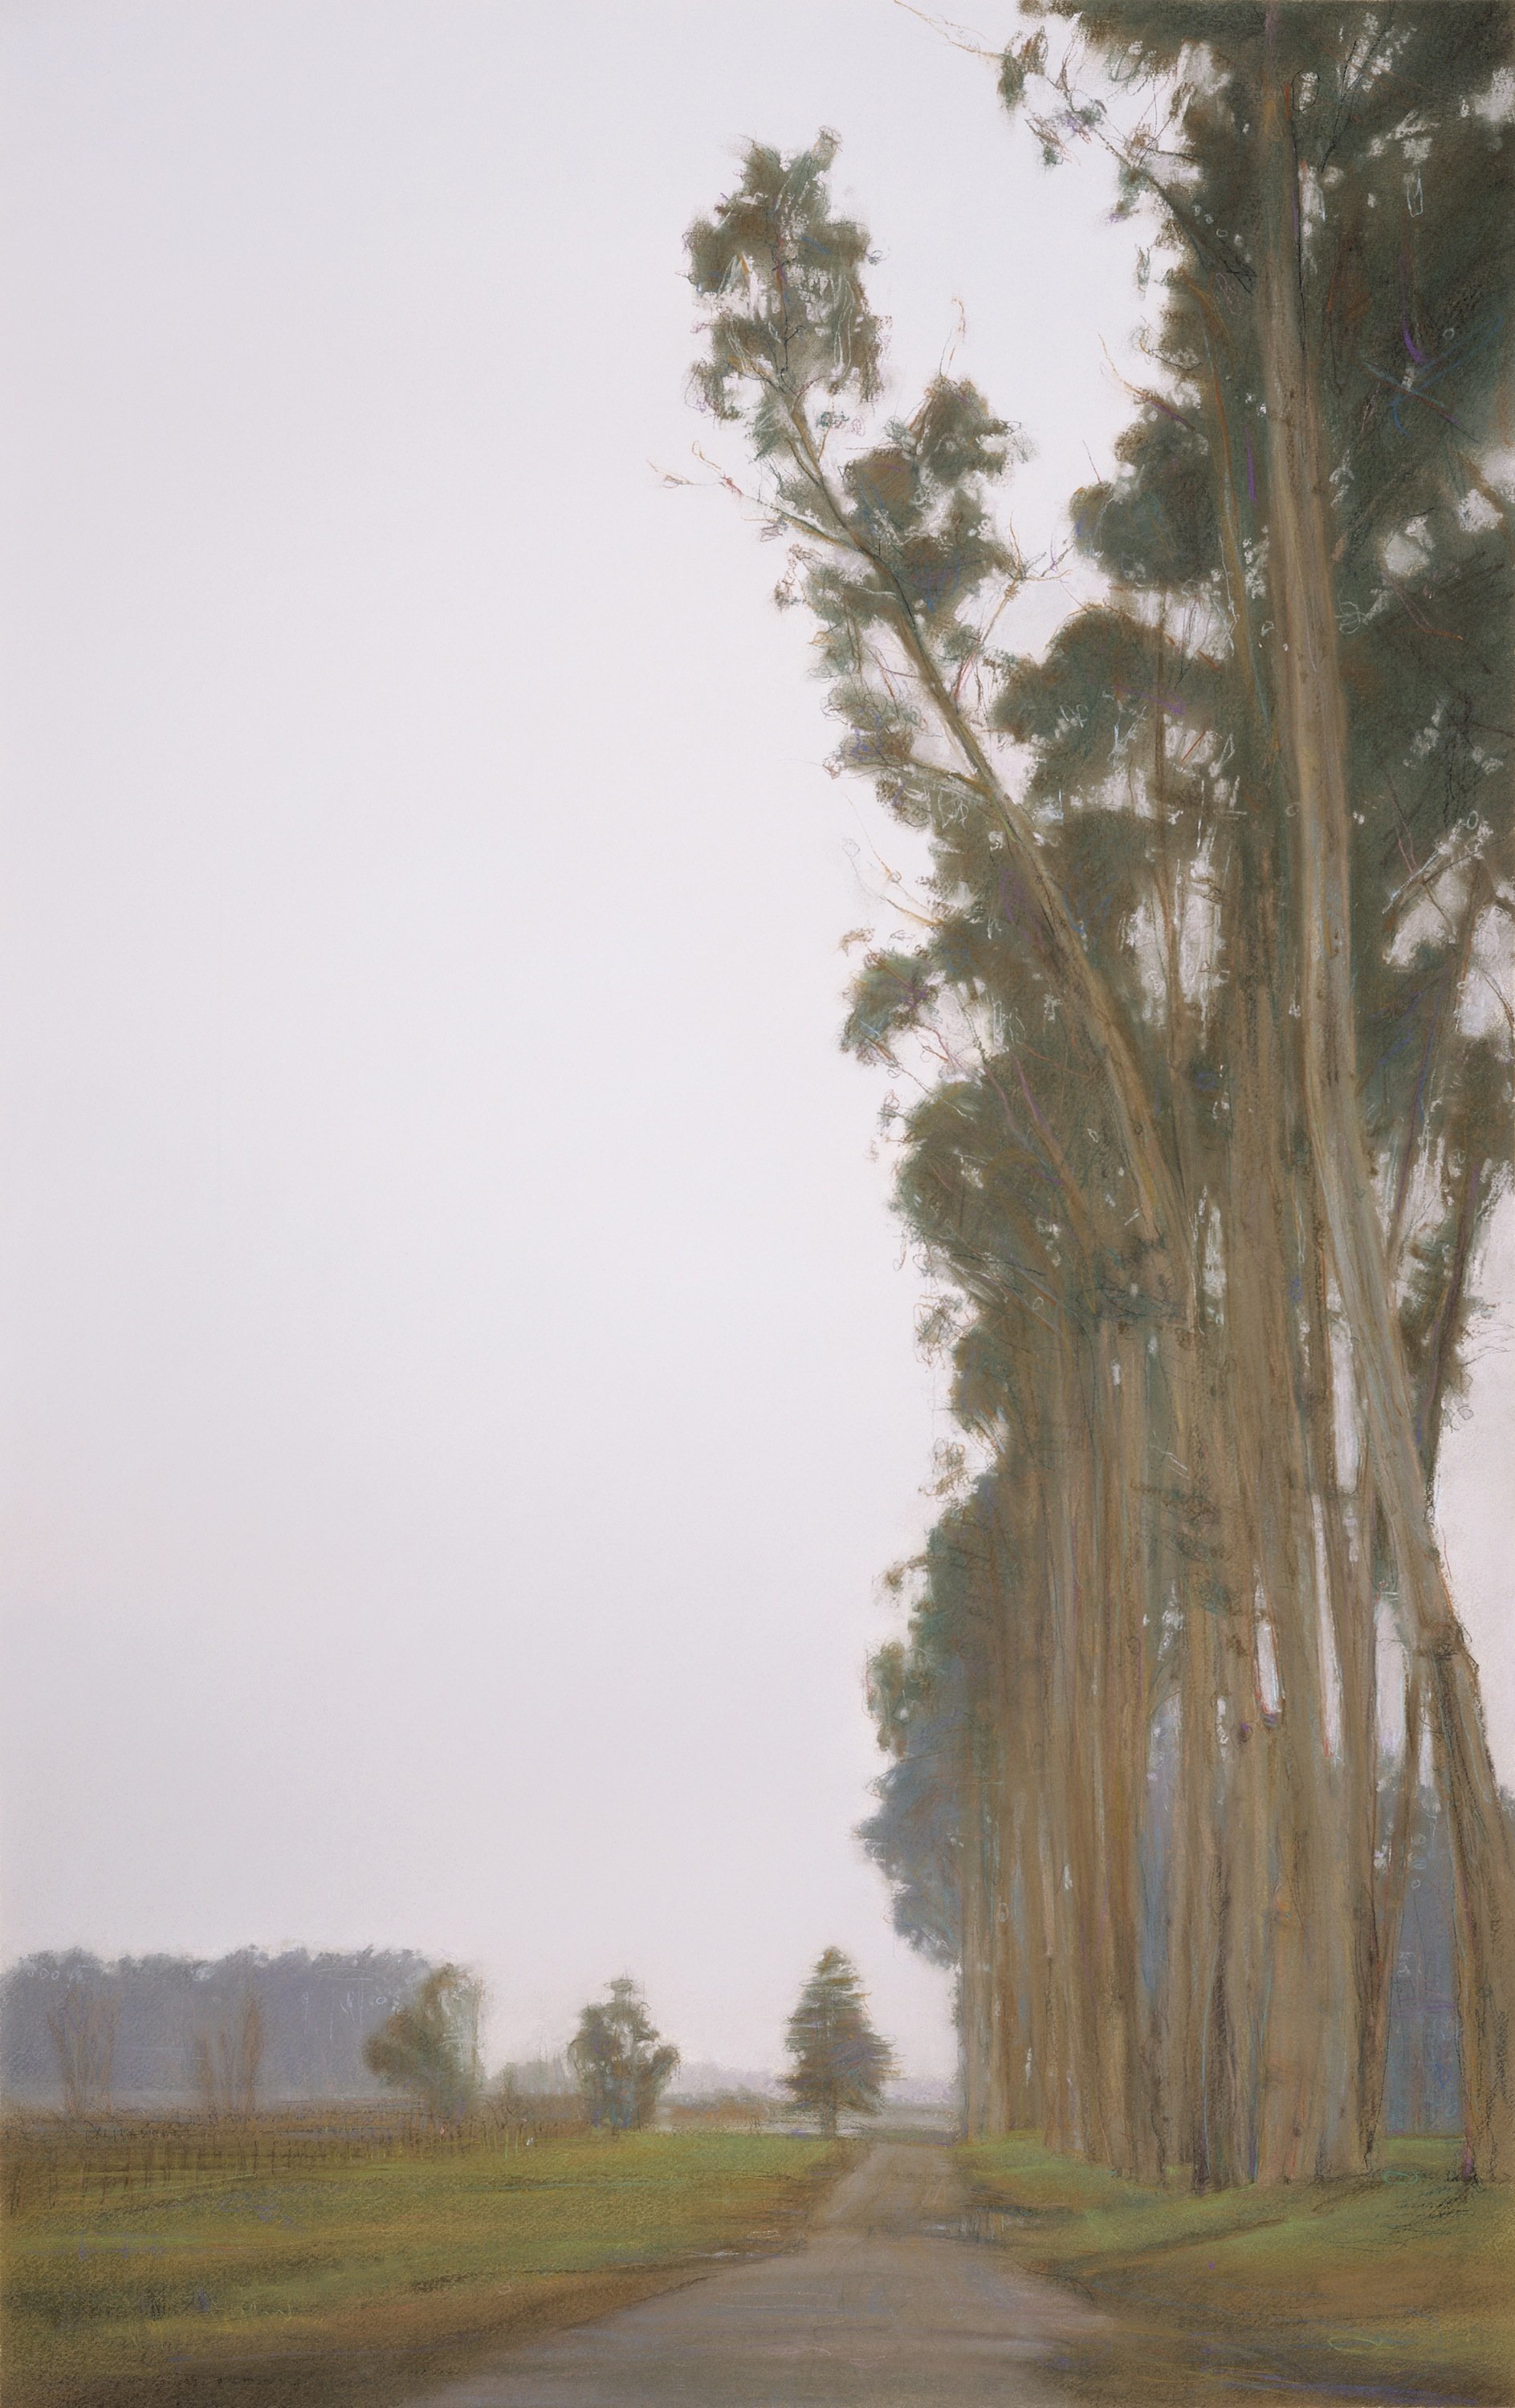 Steven Gordon; Stanly Lane, 2003, Original Printmaking Giclee, 19 x 31 inches. Artwork description: 241 This limited edition Gicli? 1/2e print based on an original pastel painting is a view of a well known area in The Napa Valley. The iconic long row of giant eucalyptus trees, on a road called Stanly Lane, sits majestically at the edge of the valley, bordering ...